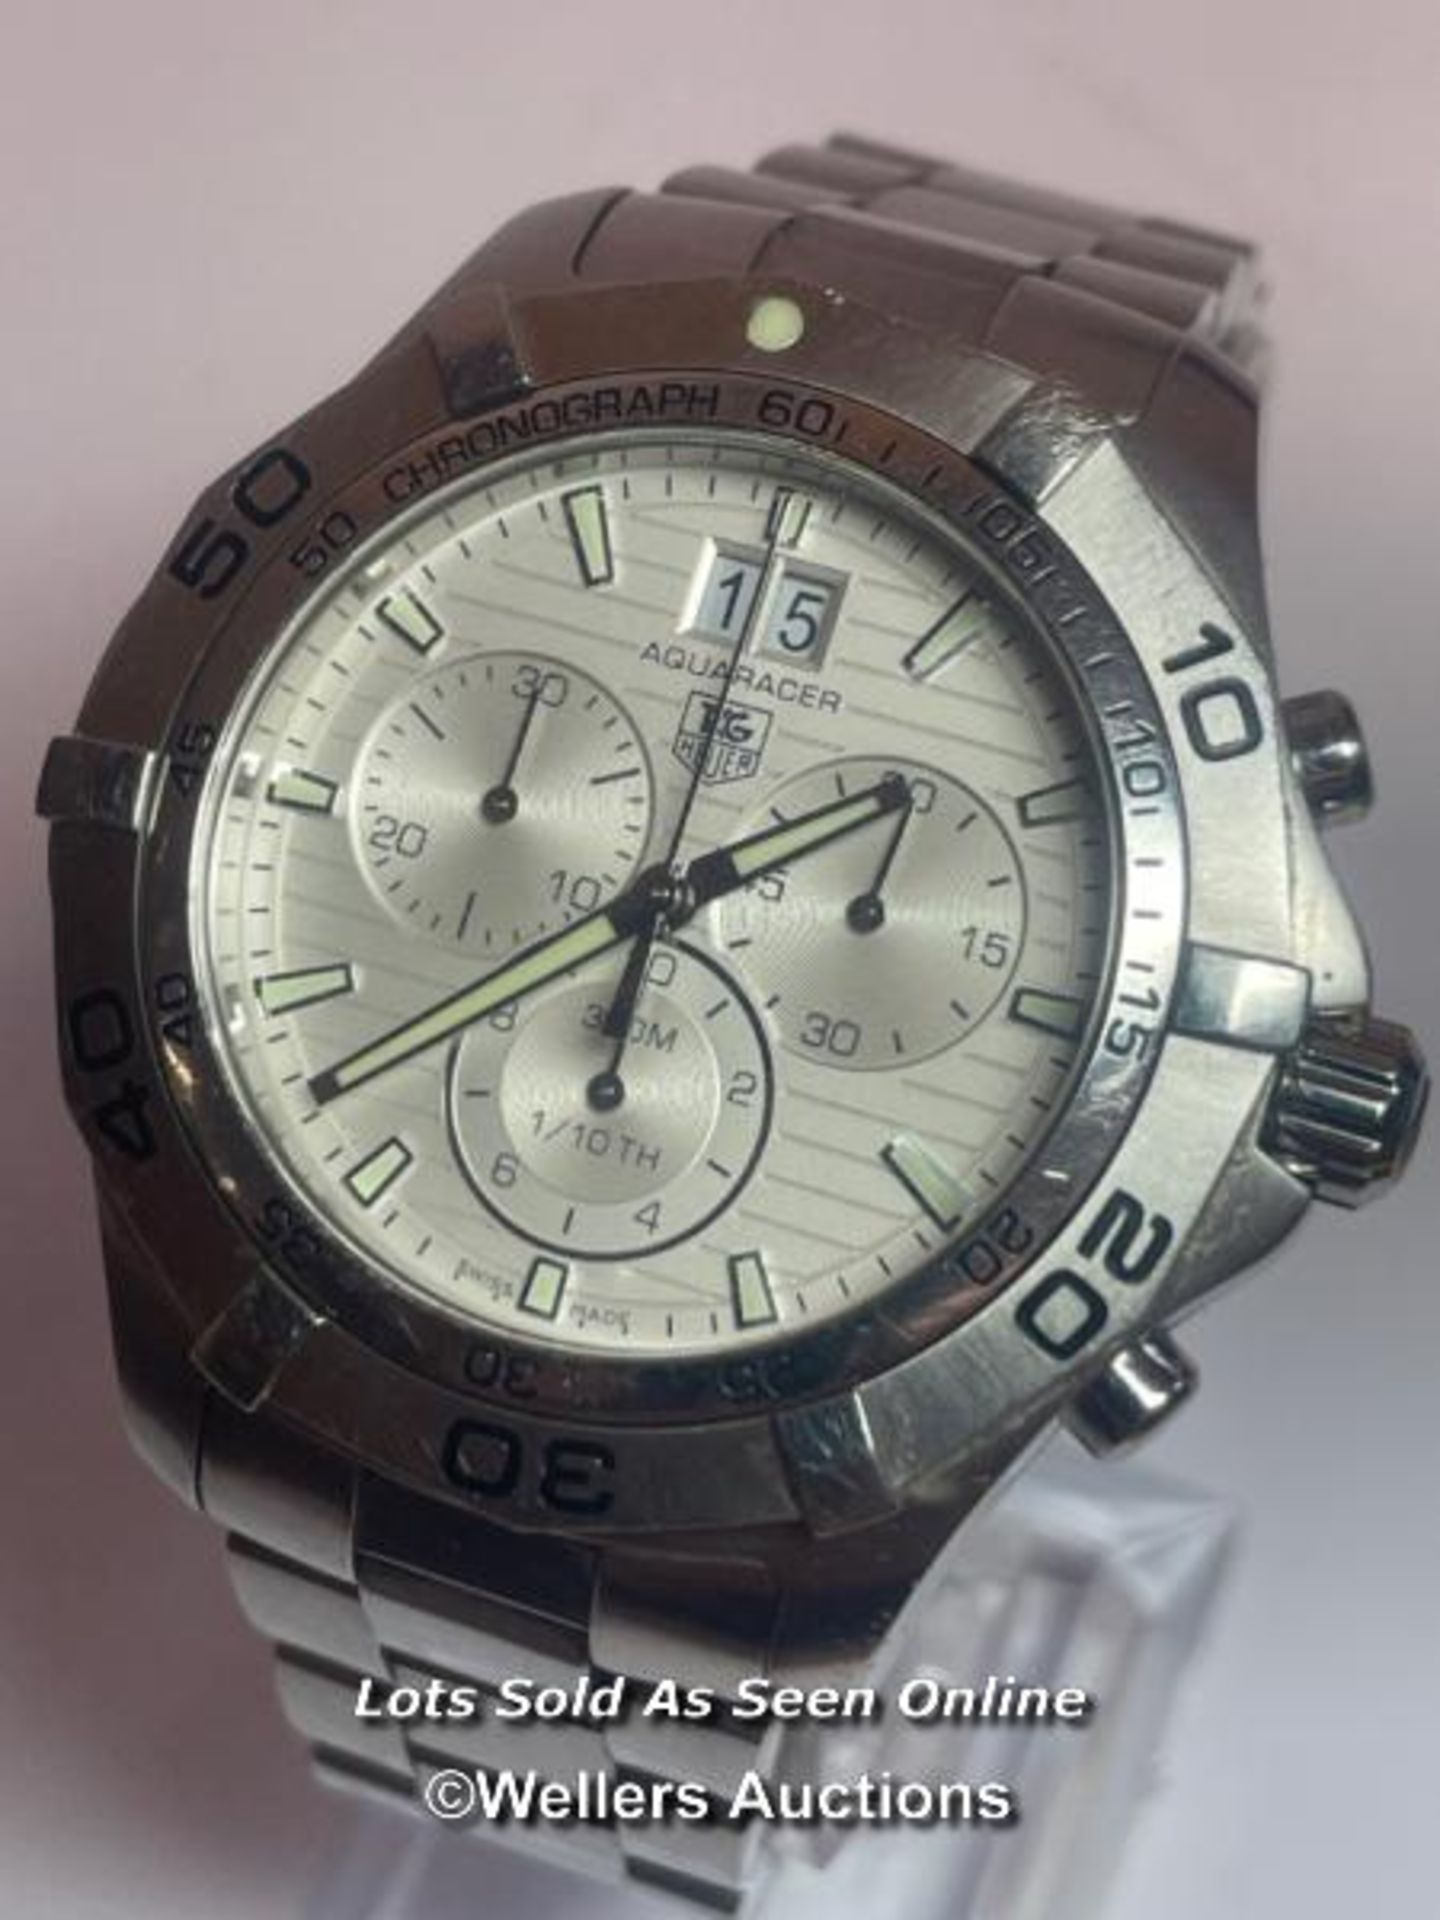 Tag Heuer aqua racer stainless steel wristwatch no. CAF101F, 3.3cm dial, good cosmetic condition